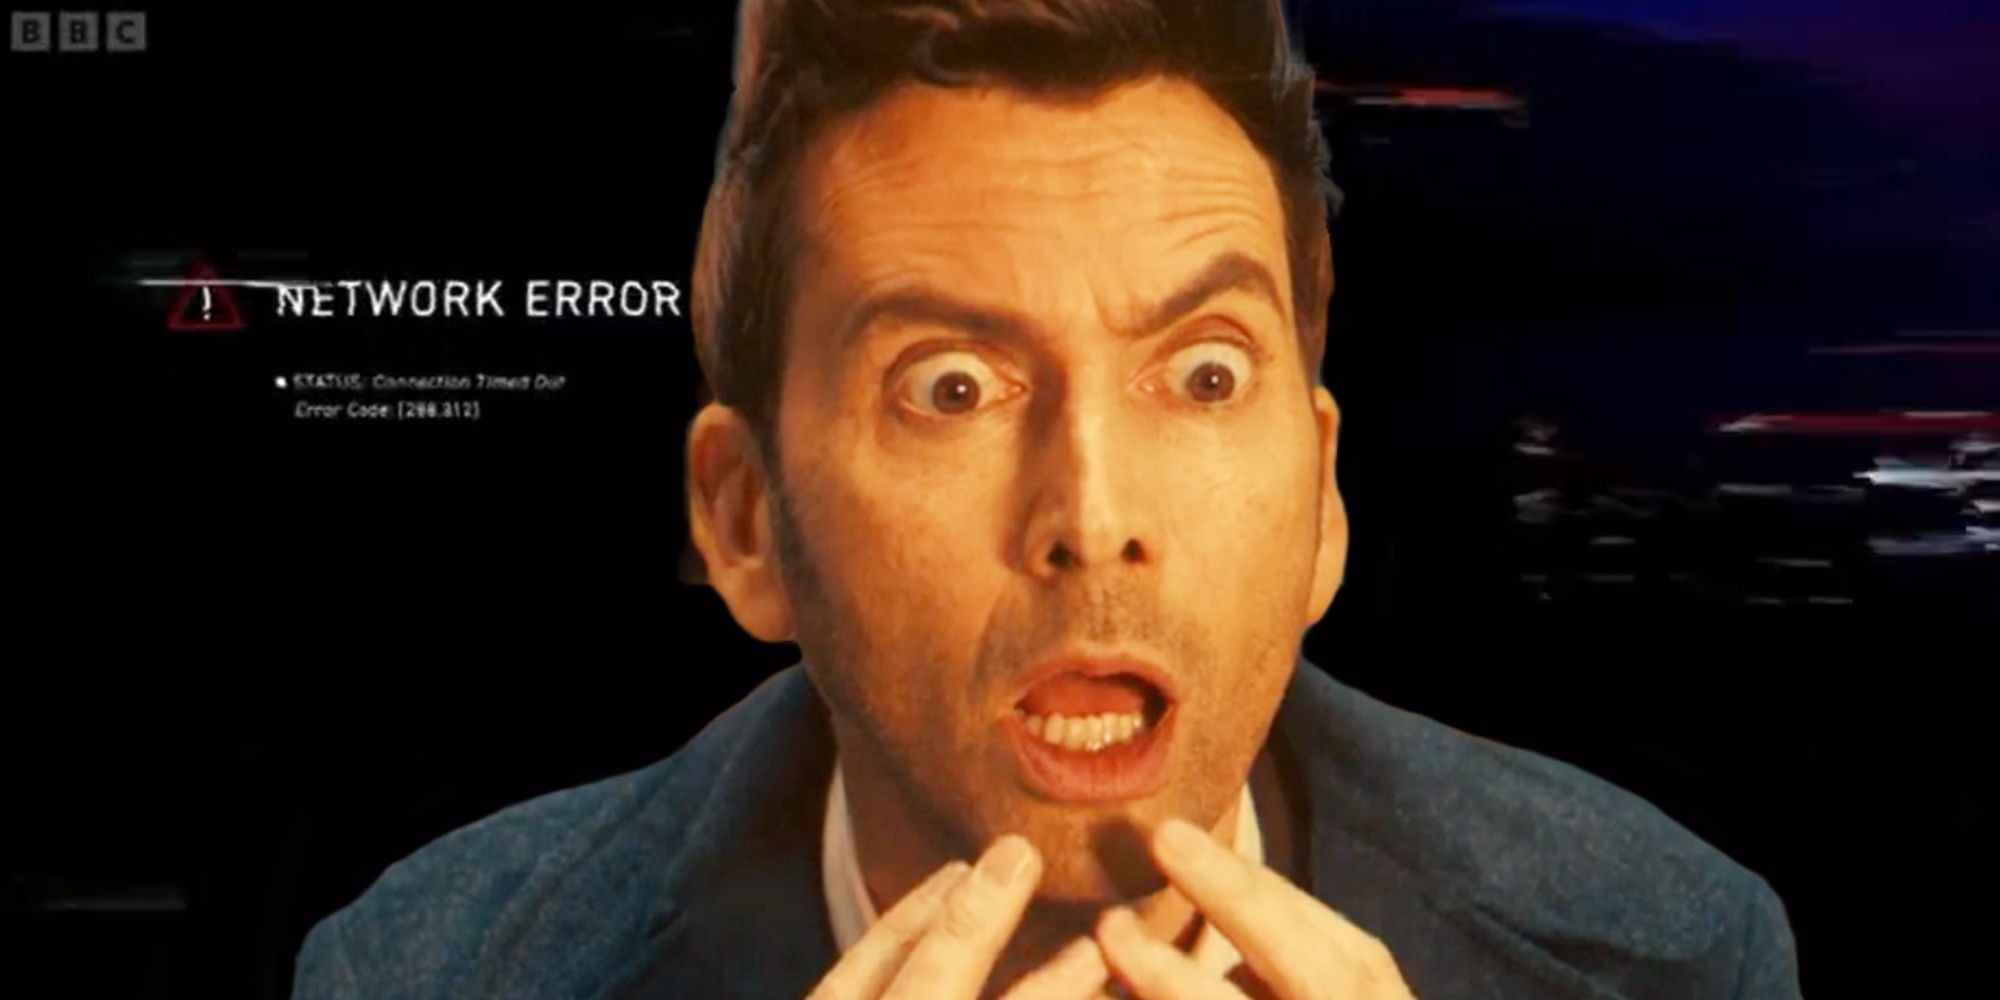 Fourtheenth Doctor shocked face in Doctor Who 60th Anniversary special